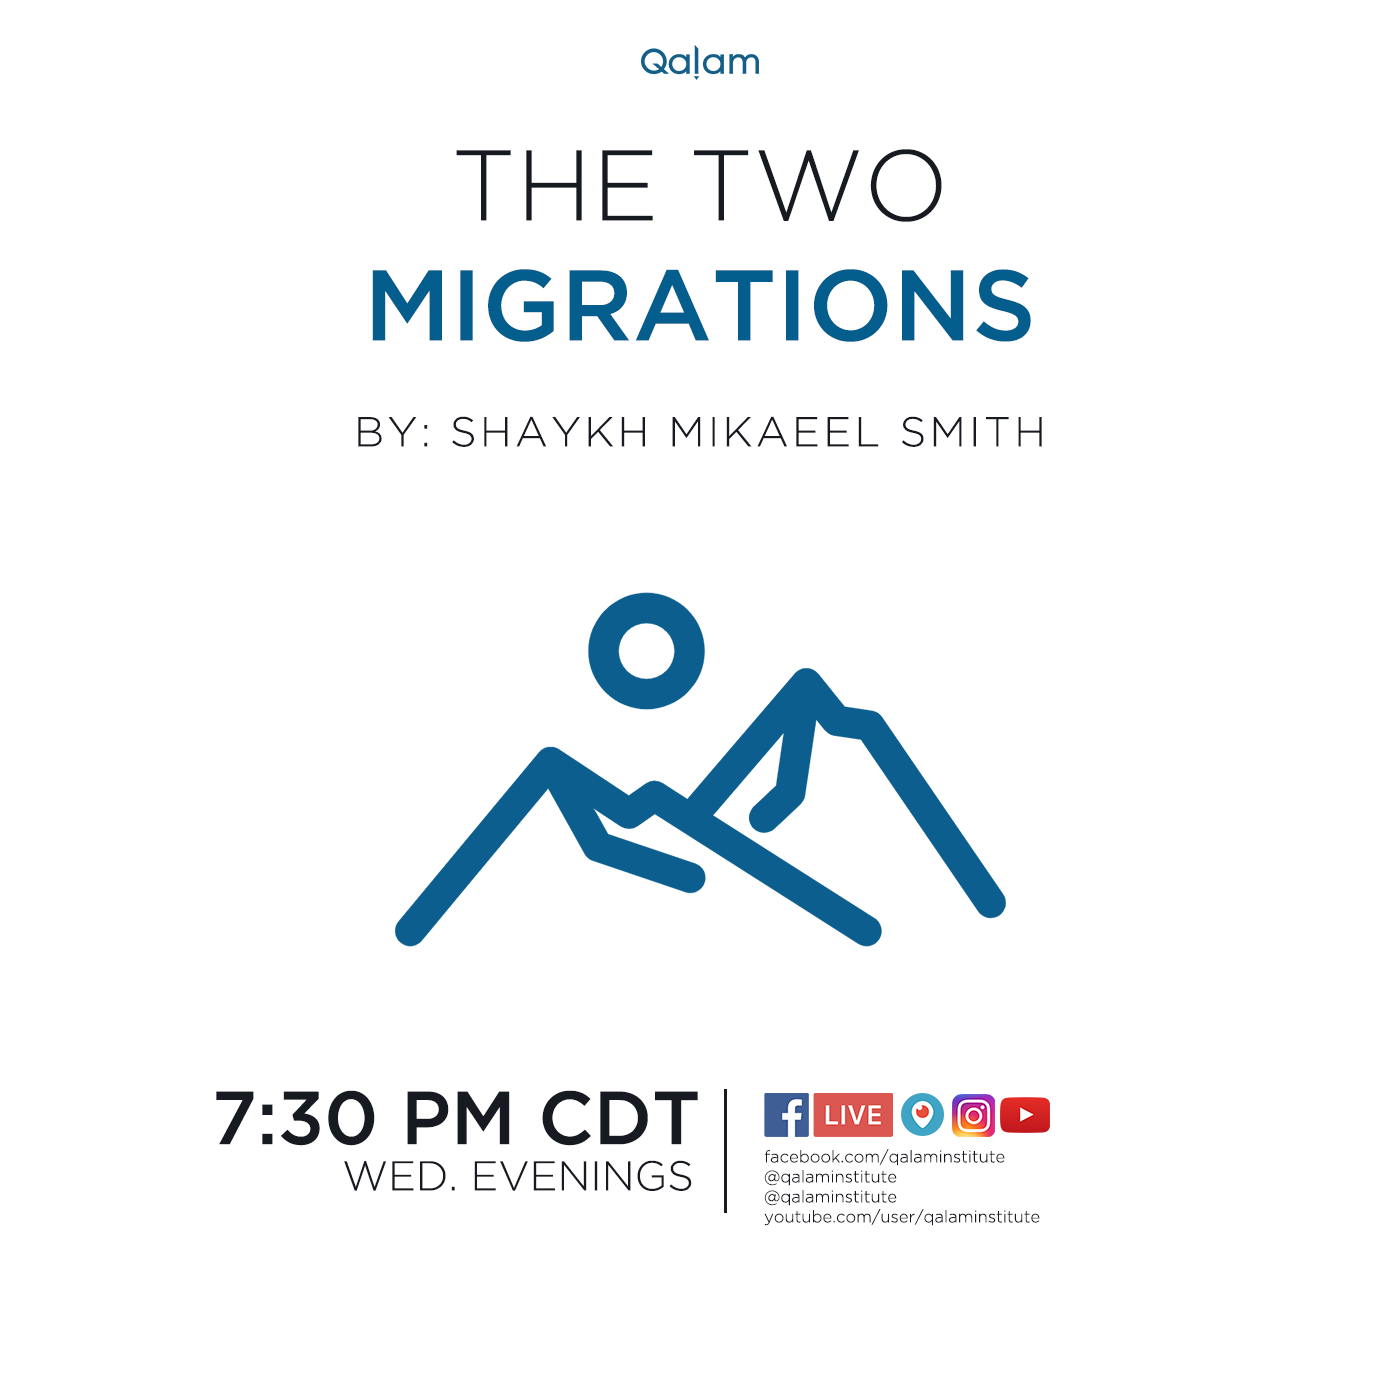 The Two Migrations: EP20